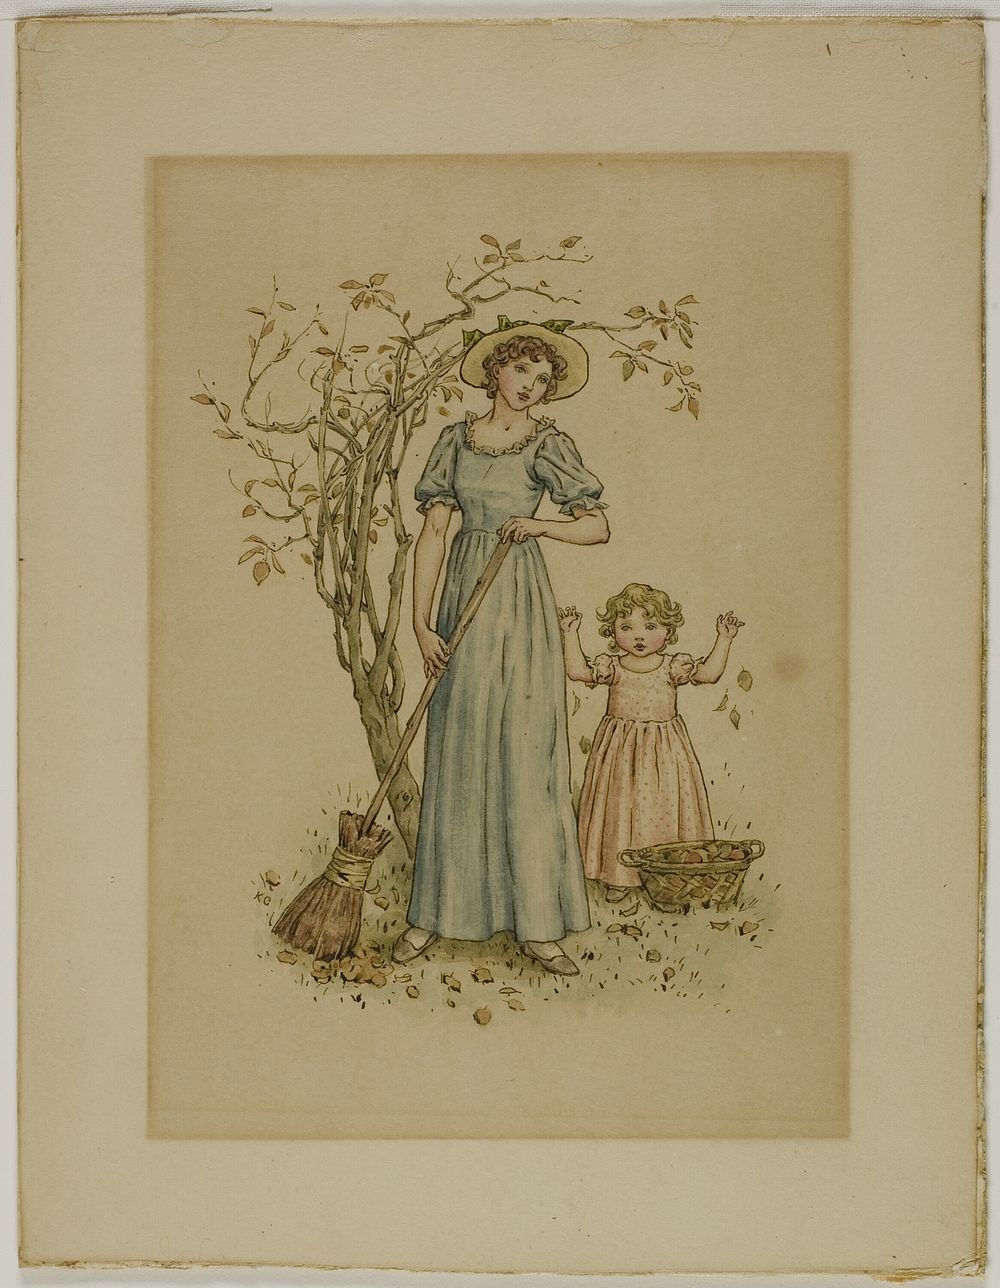 Woman with Broom and Little Girl by Kate Greenaway